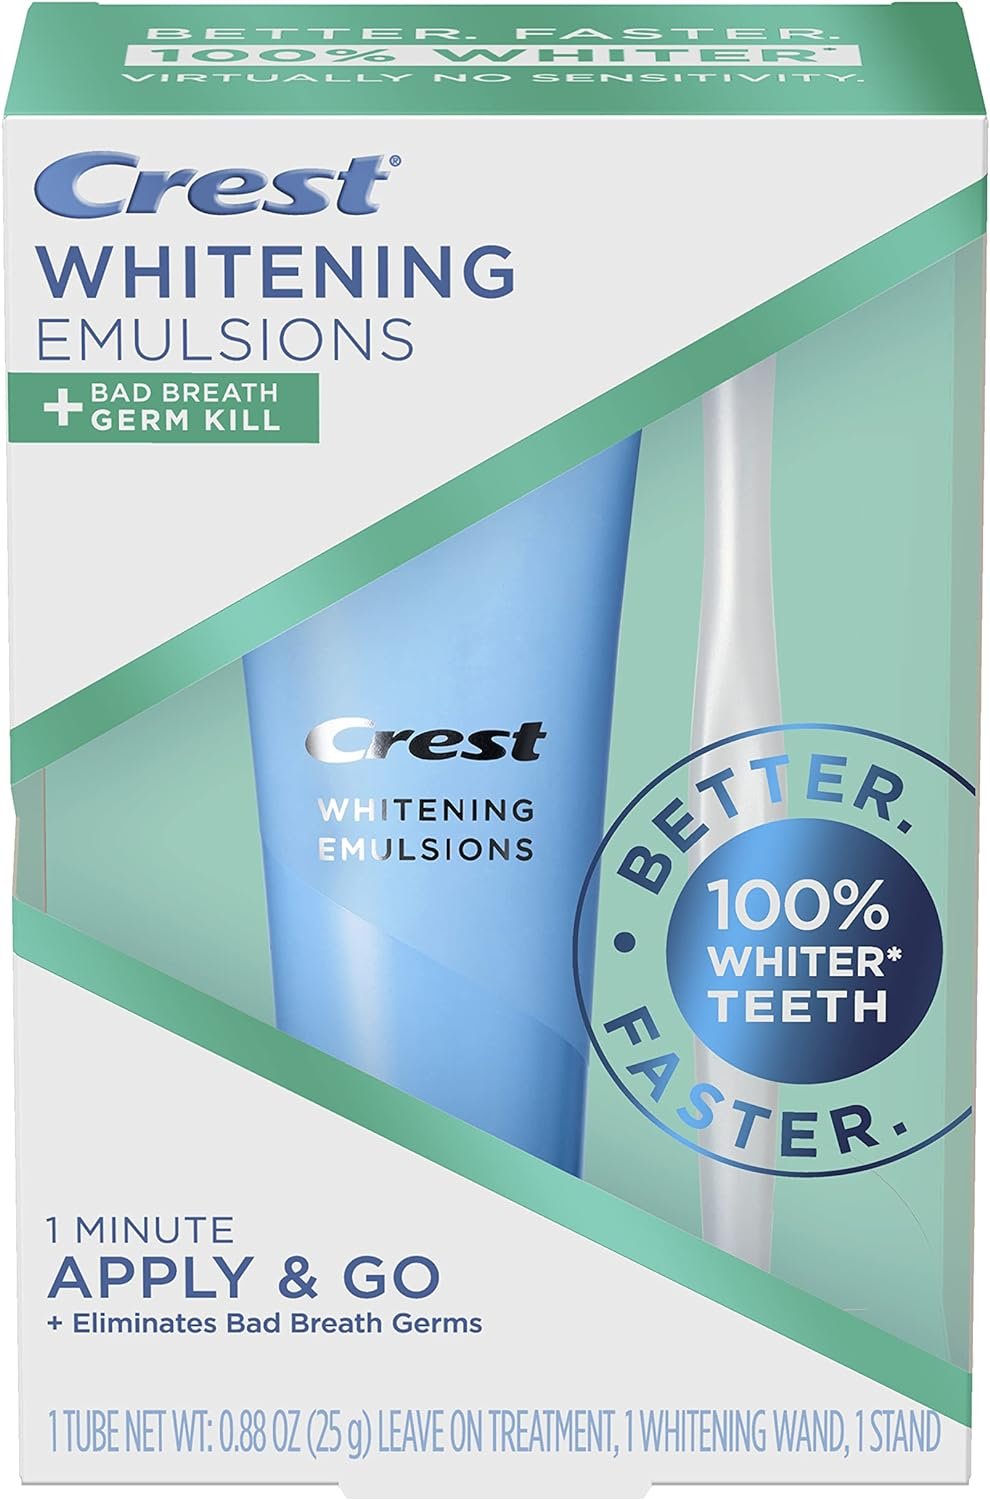 Crest Whitening Emulsions + Bad Breath Germ Kill Leave-On Teeth Whitening Gel Kit with Wand Applicator and Stand, Apply  Go, 0.88oz